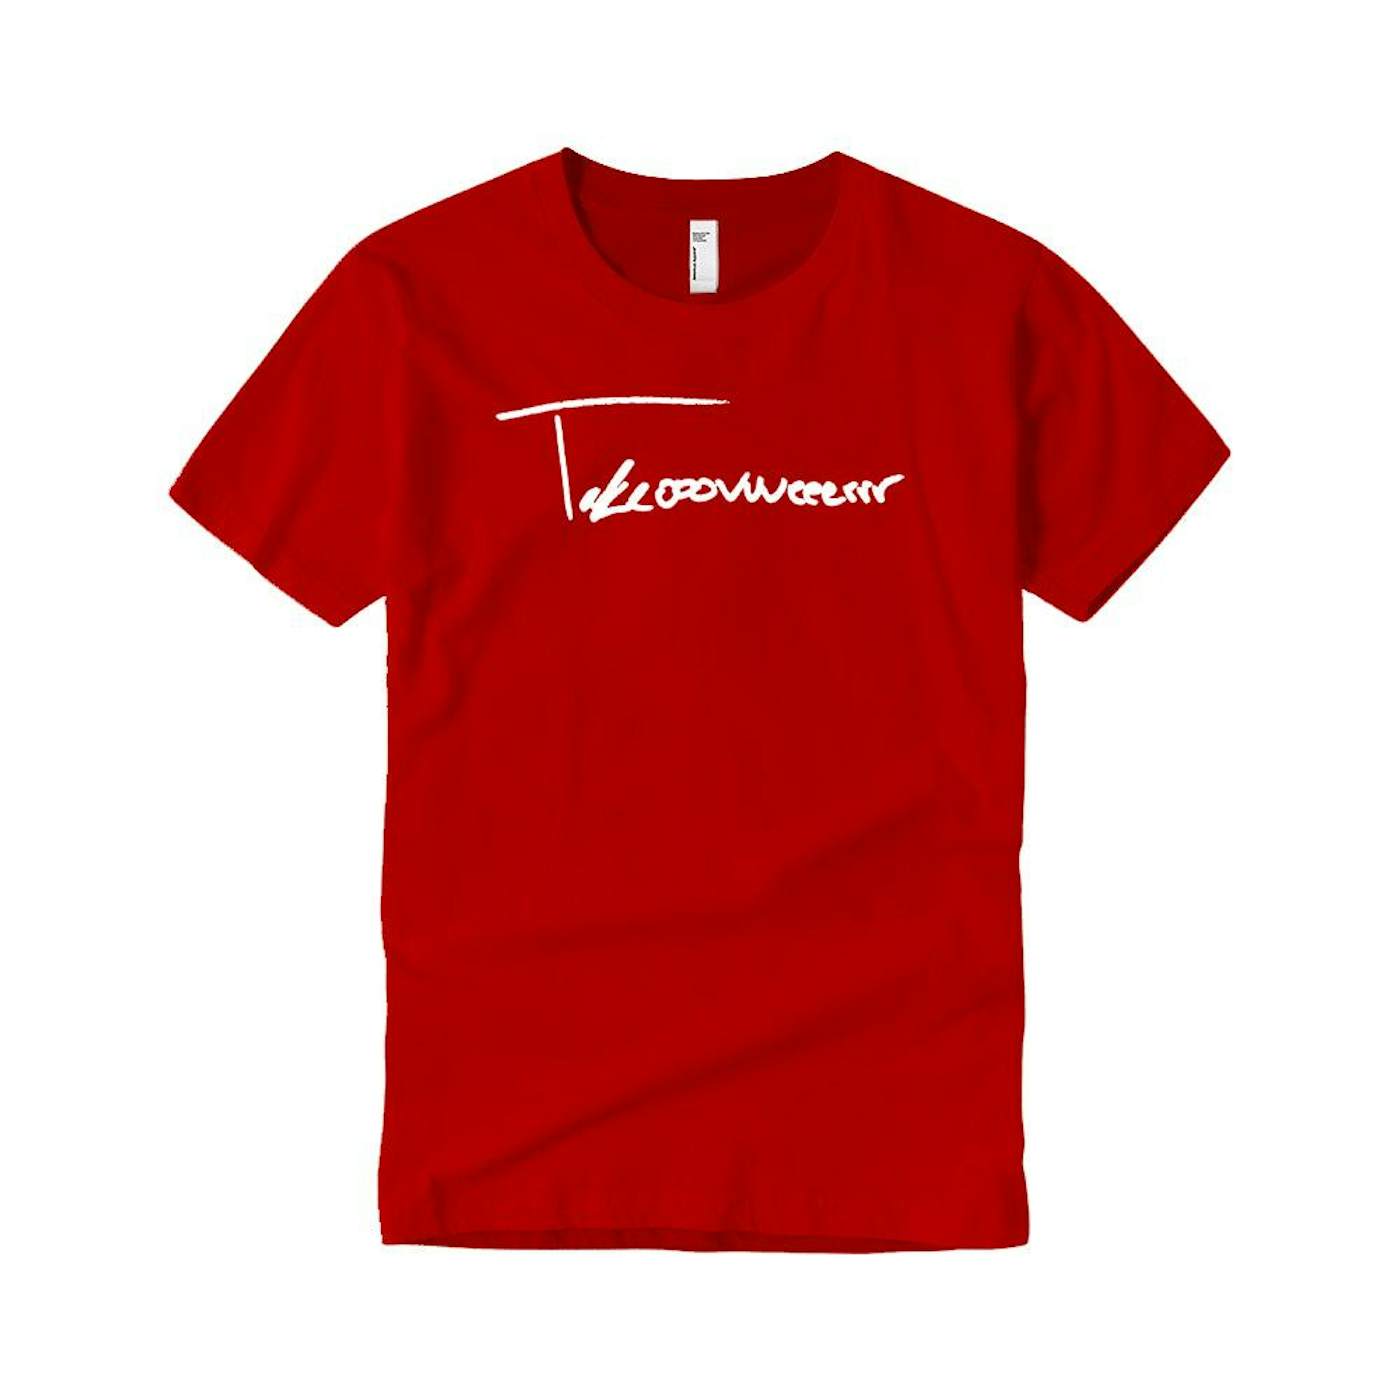 Taylor J Takeover Signature T-Shirt (Red/White)